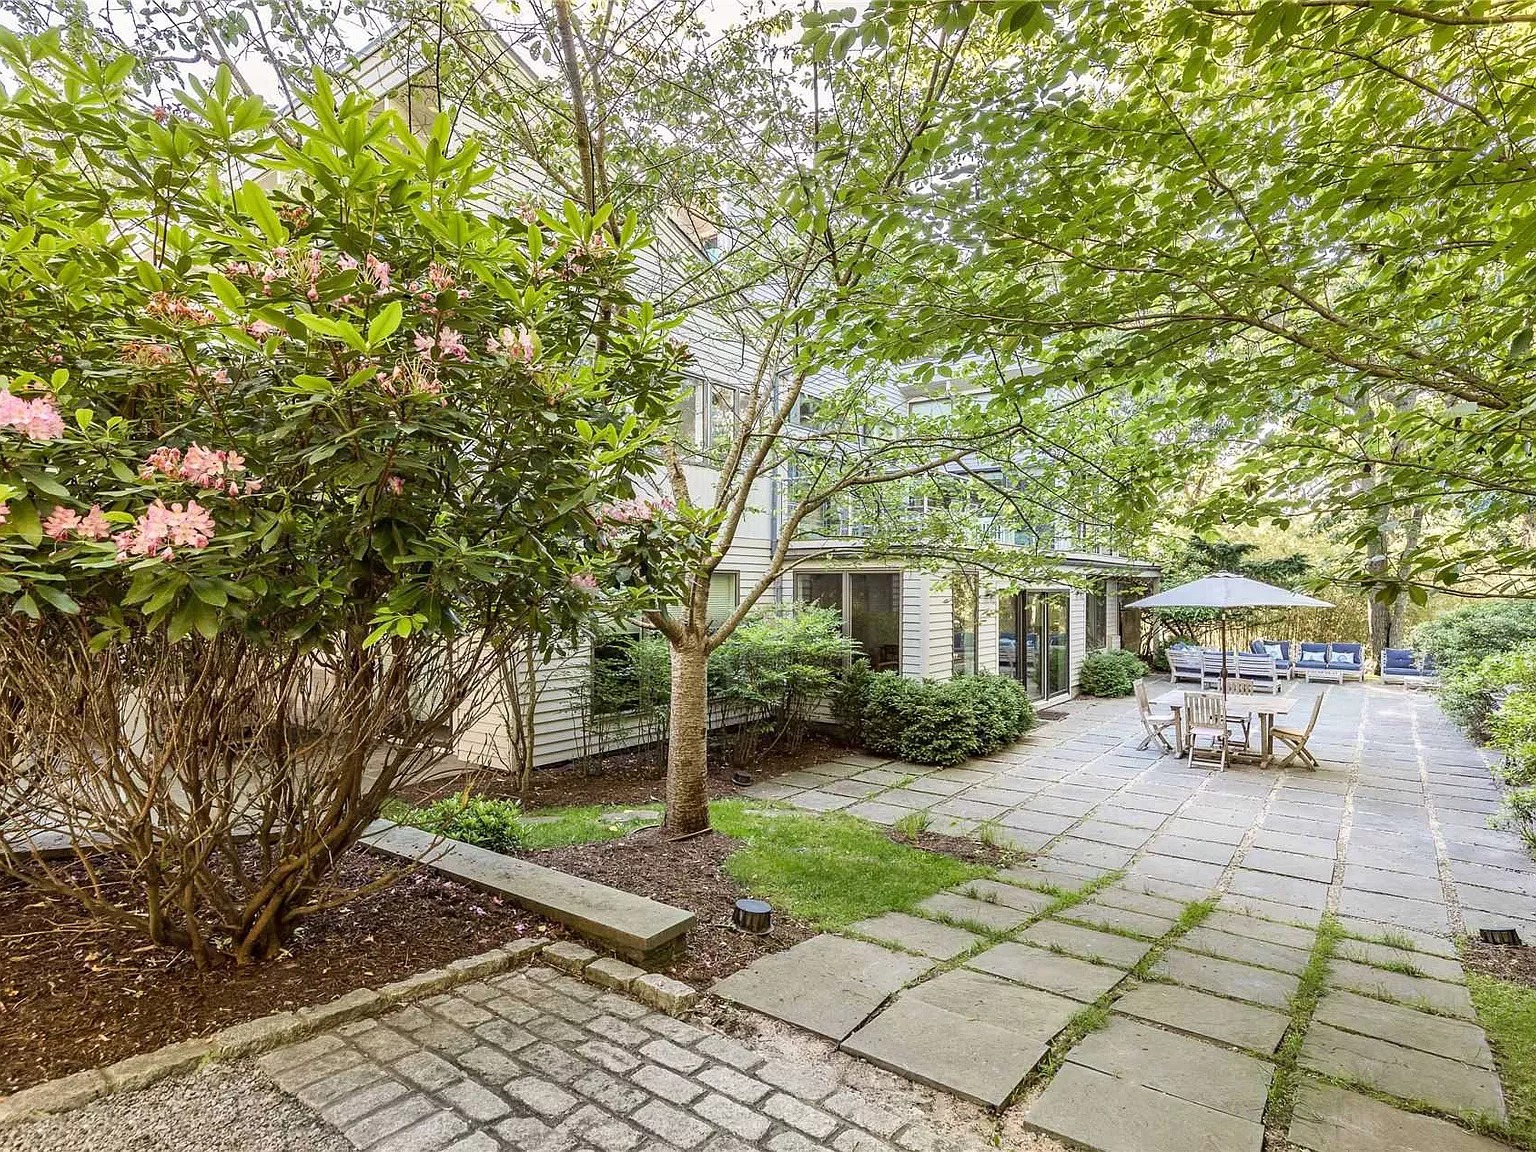 85 Oyster Shores Rd, East Hampton, NY 11937 - $3,999,000 home for sale, house images, photos and pics gallery